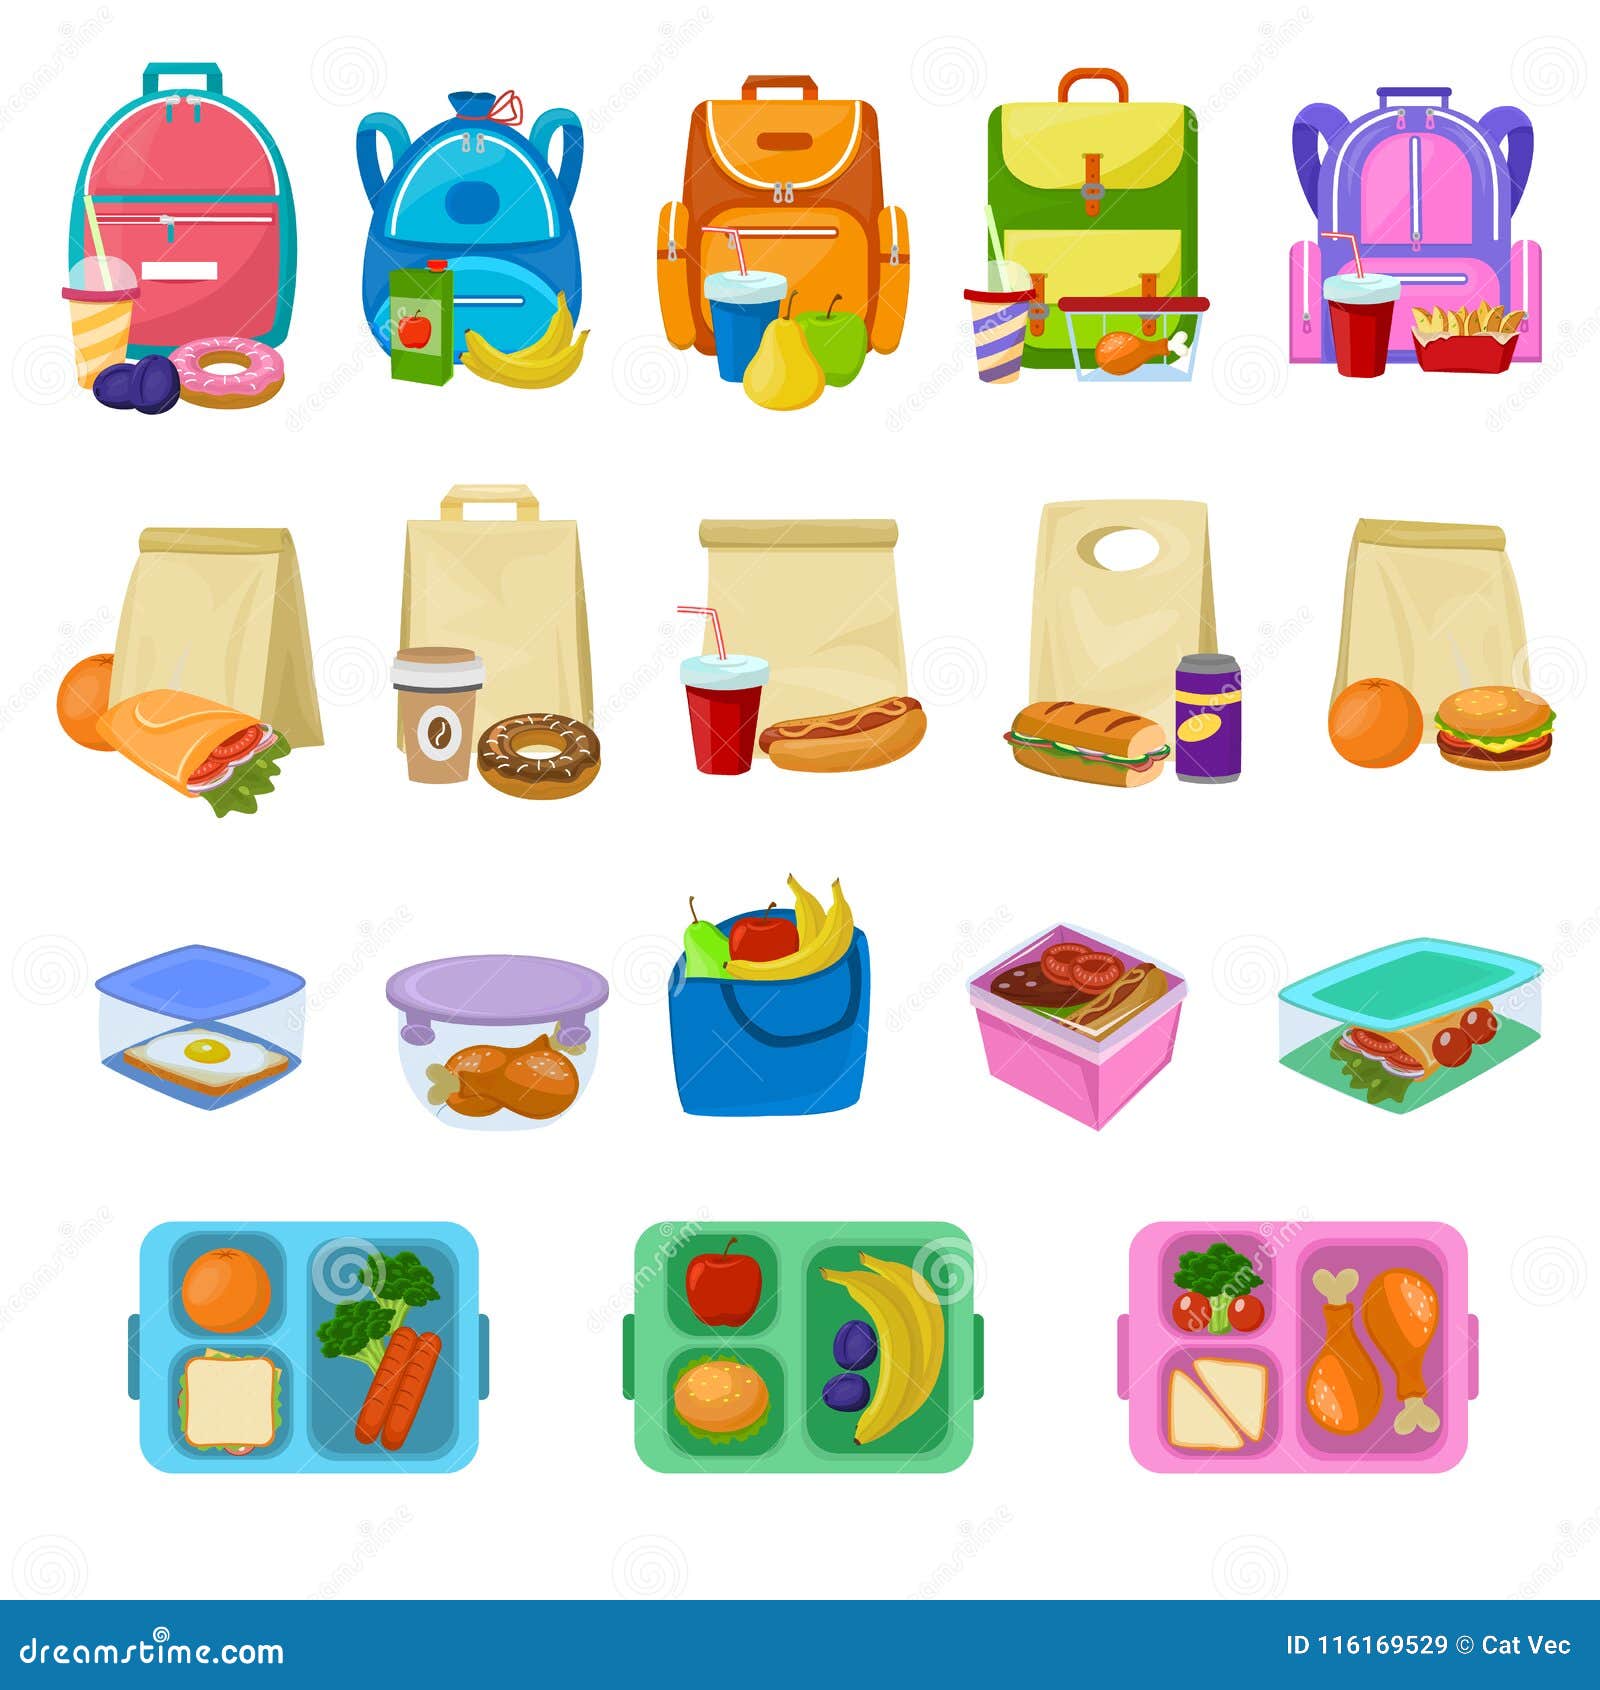 https://thumbs.dreamstime.com/z/lunch-box-vector-school-lunchbox-healthy-food-fruits-vegetables-boxed-kids-container-illustration-set-lunch-box-116169529.jpg